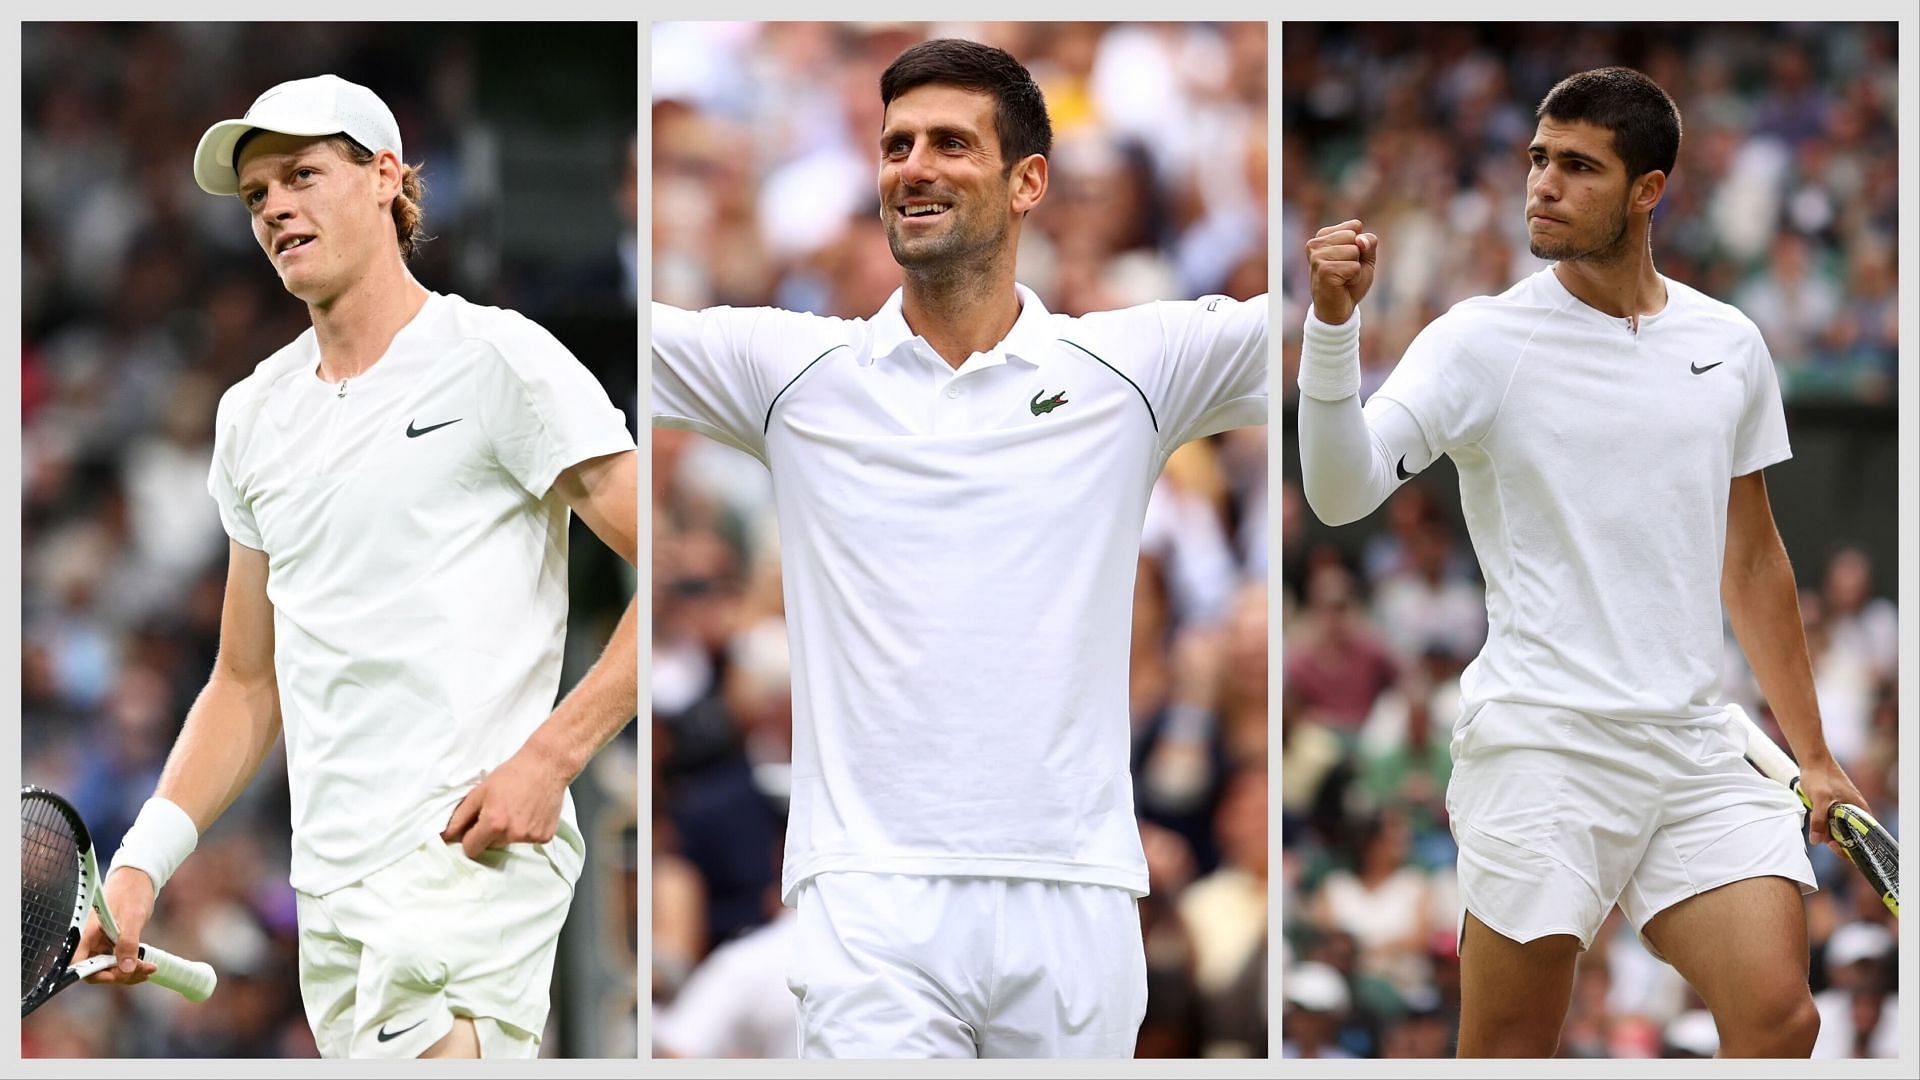 Sinner, Djokovic and Alcaraz are the three top seeds in this year